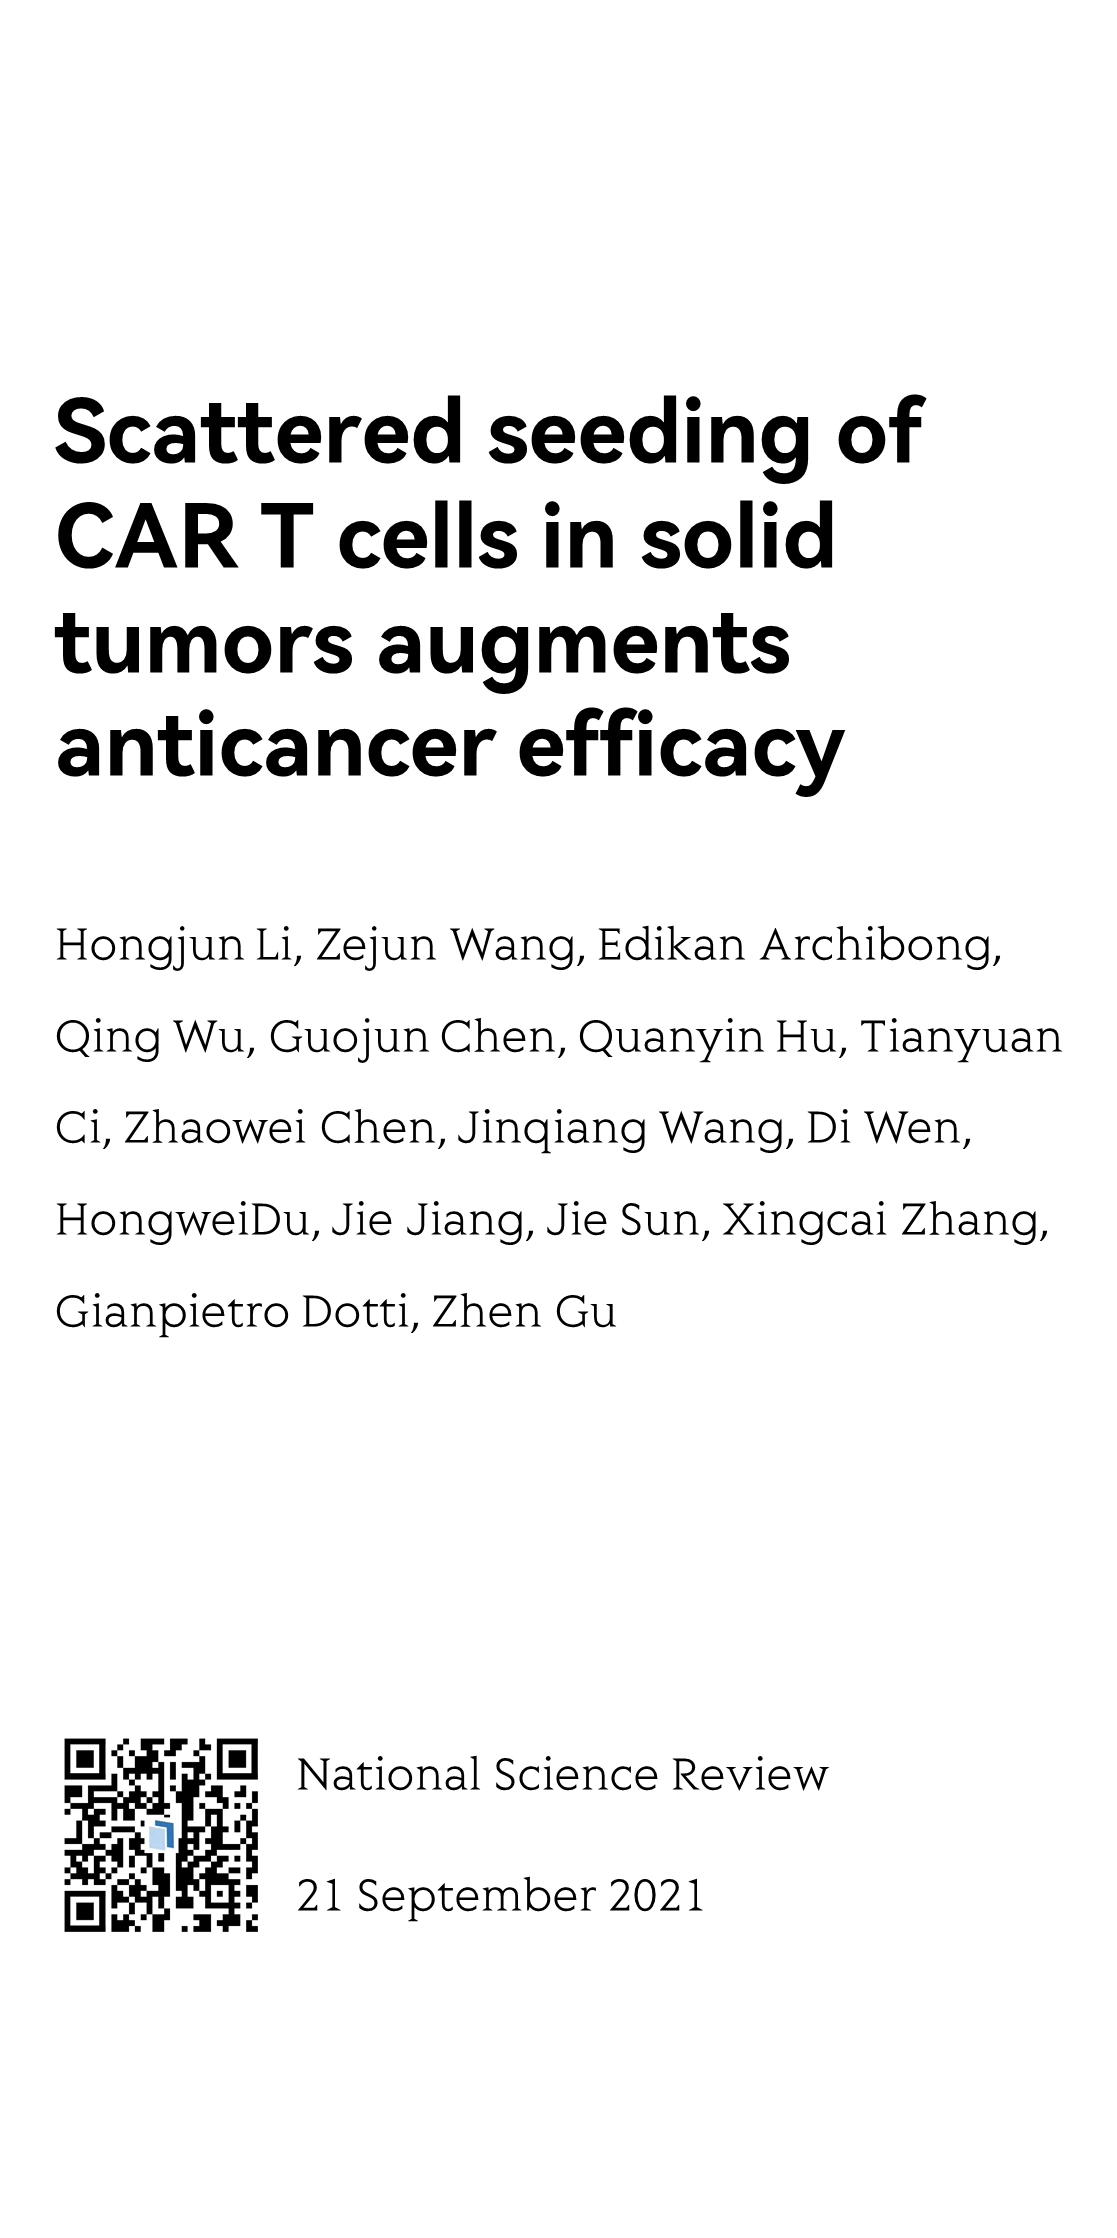 Scattered seeding of CAR T cells in solid tumors augments anticancer efficacy_1